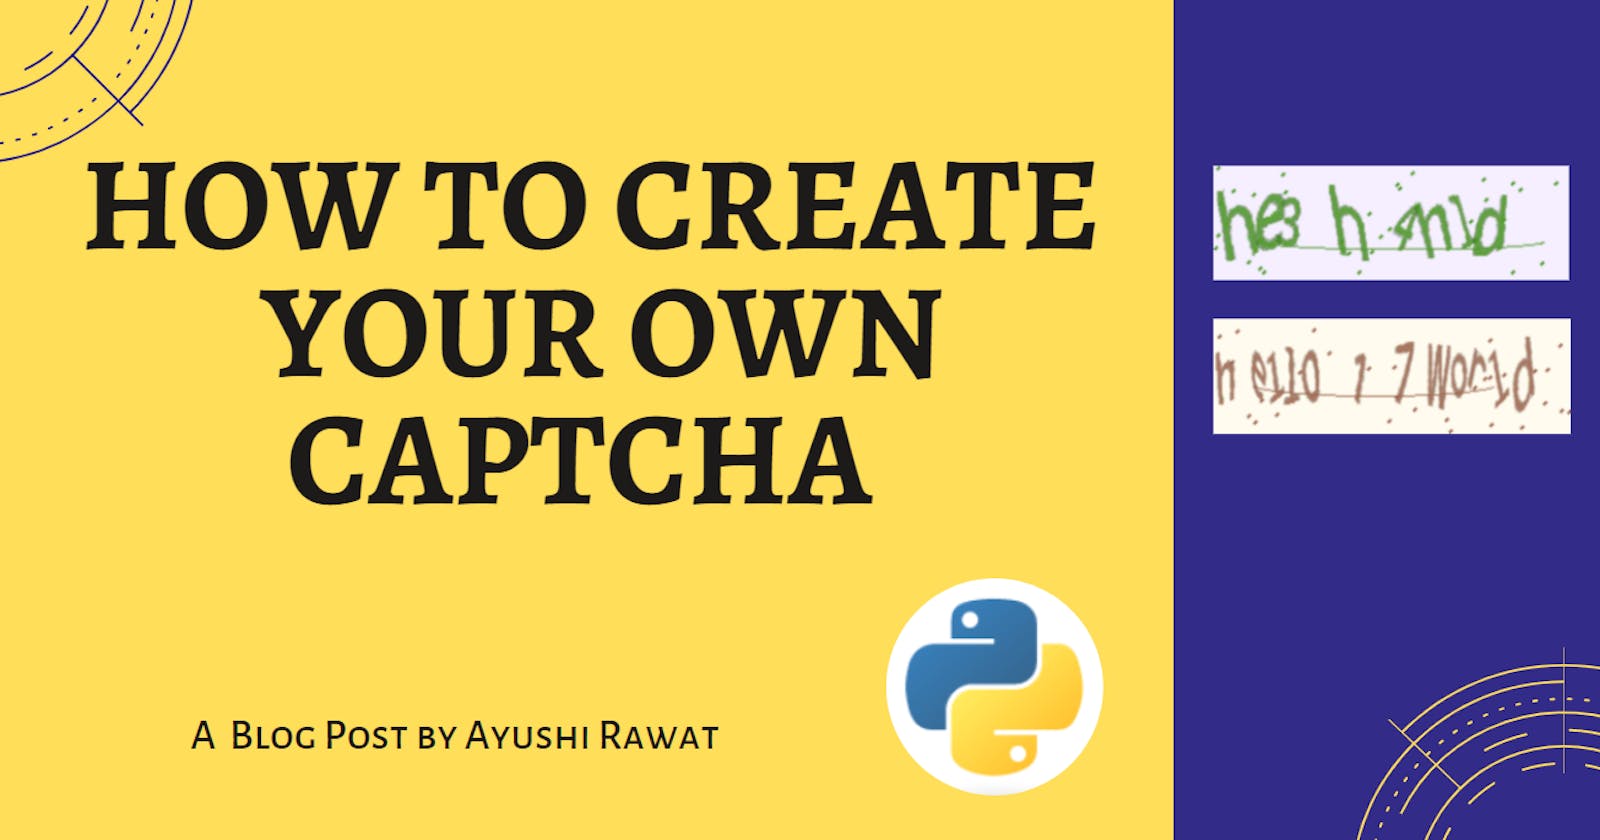 How to create your own captcha with python